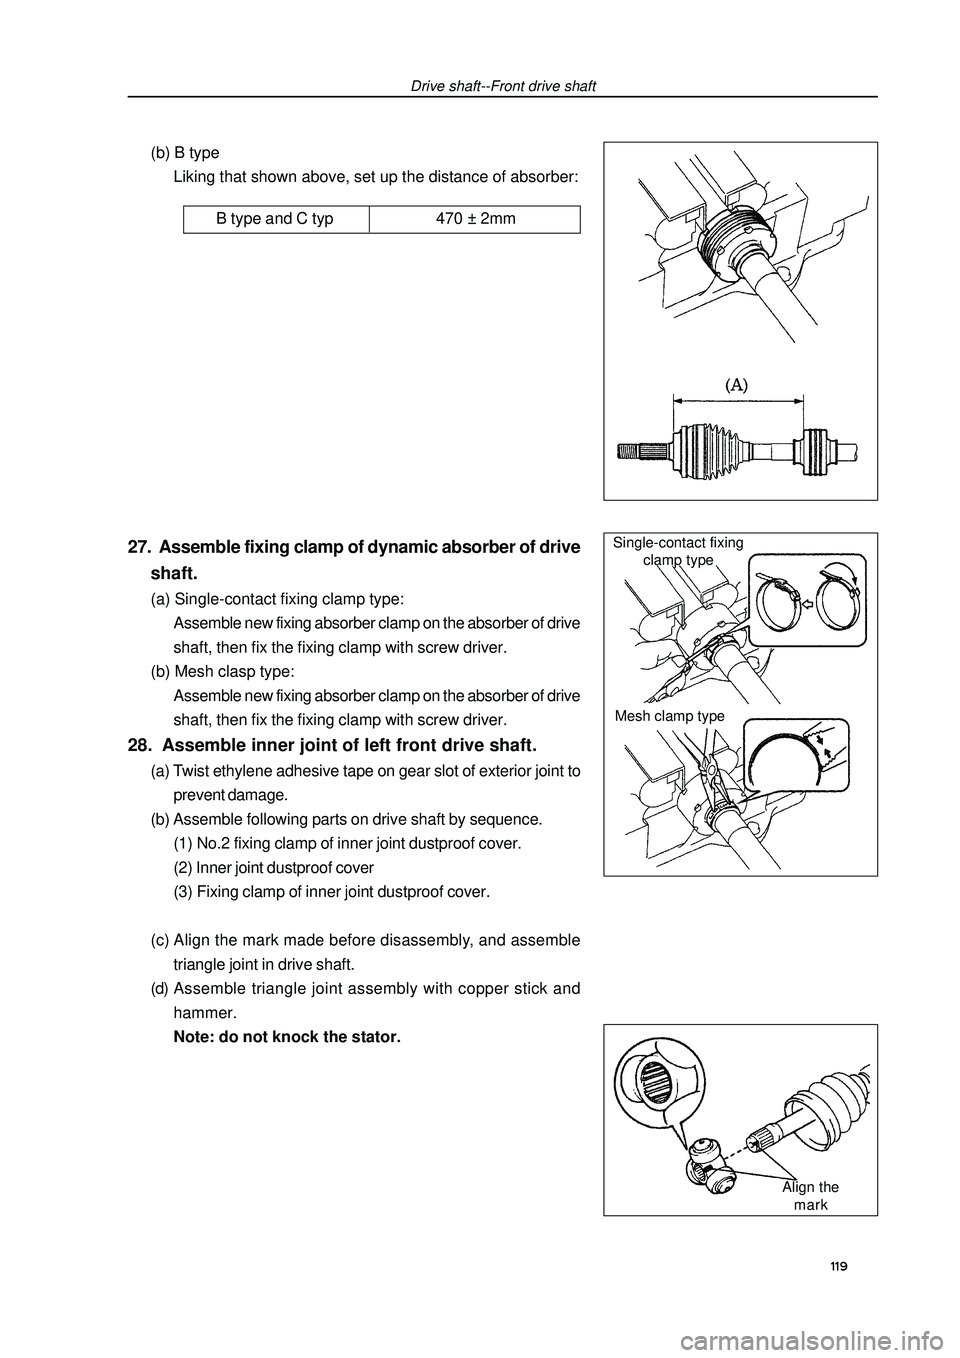 GEELY FC 2008  Workshop Manual Drive shaft--Front drive shaft(b) B type
Liking that shown above, set up the distance of absorber:27.  Assemble fixing clamp of dynamic absorber of drive
shaft.(a) Single-contact fixing clamp type:
As